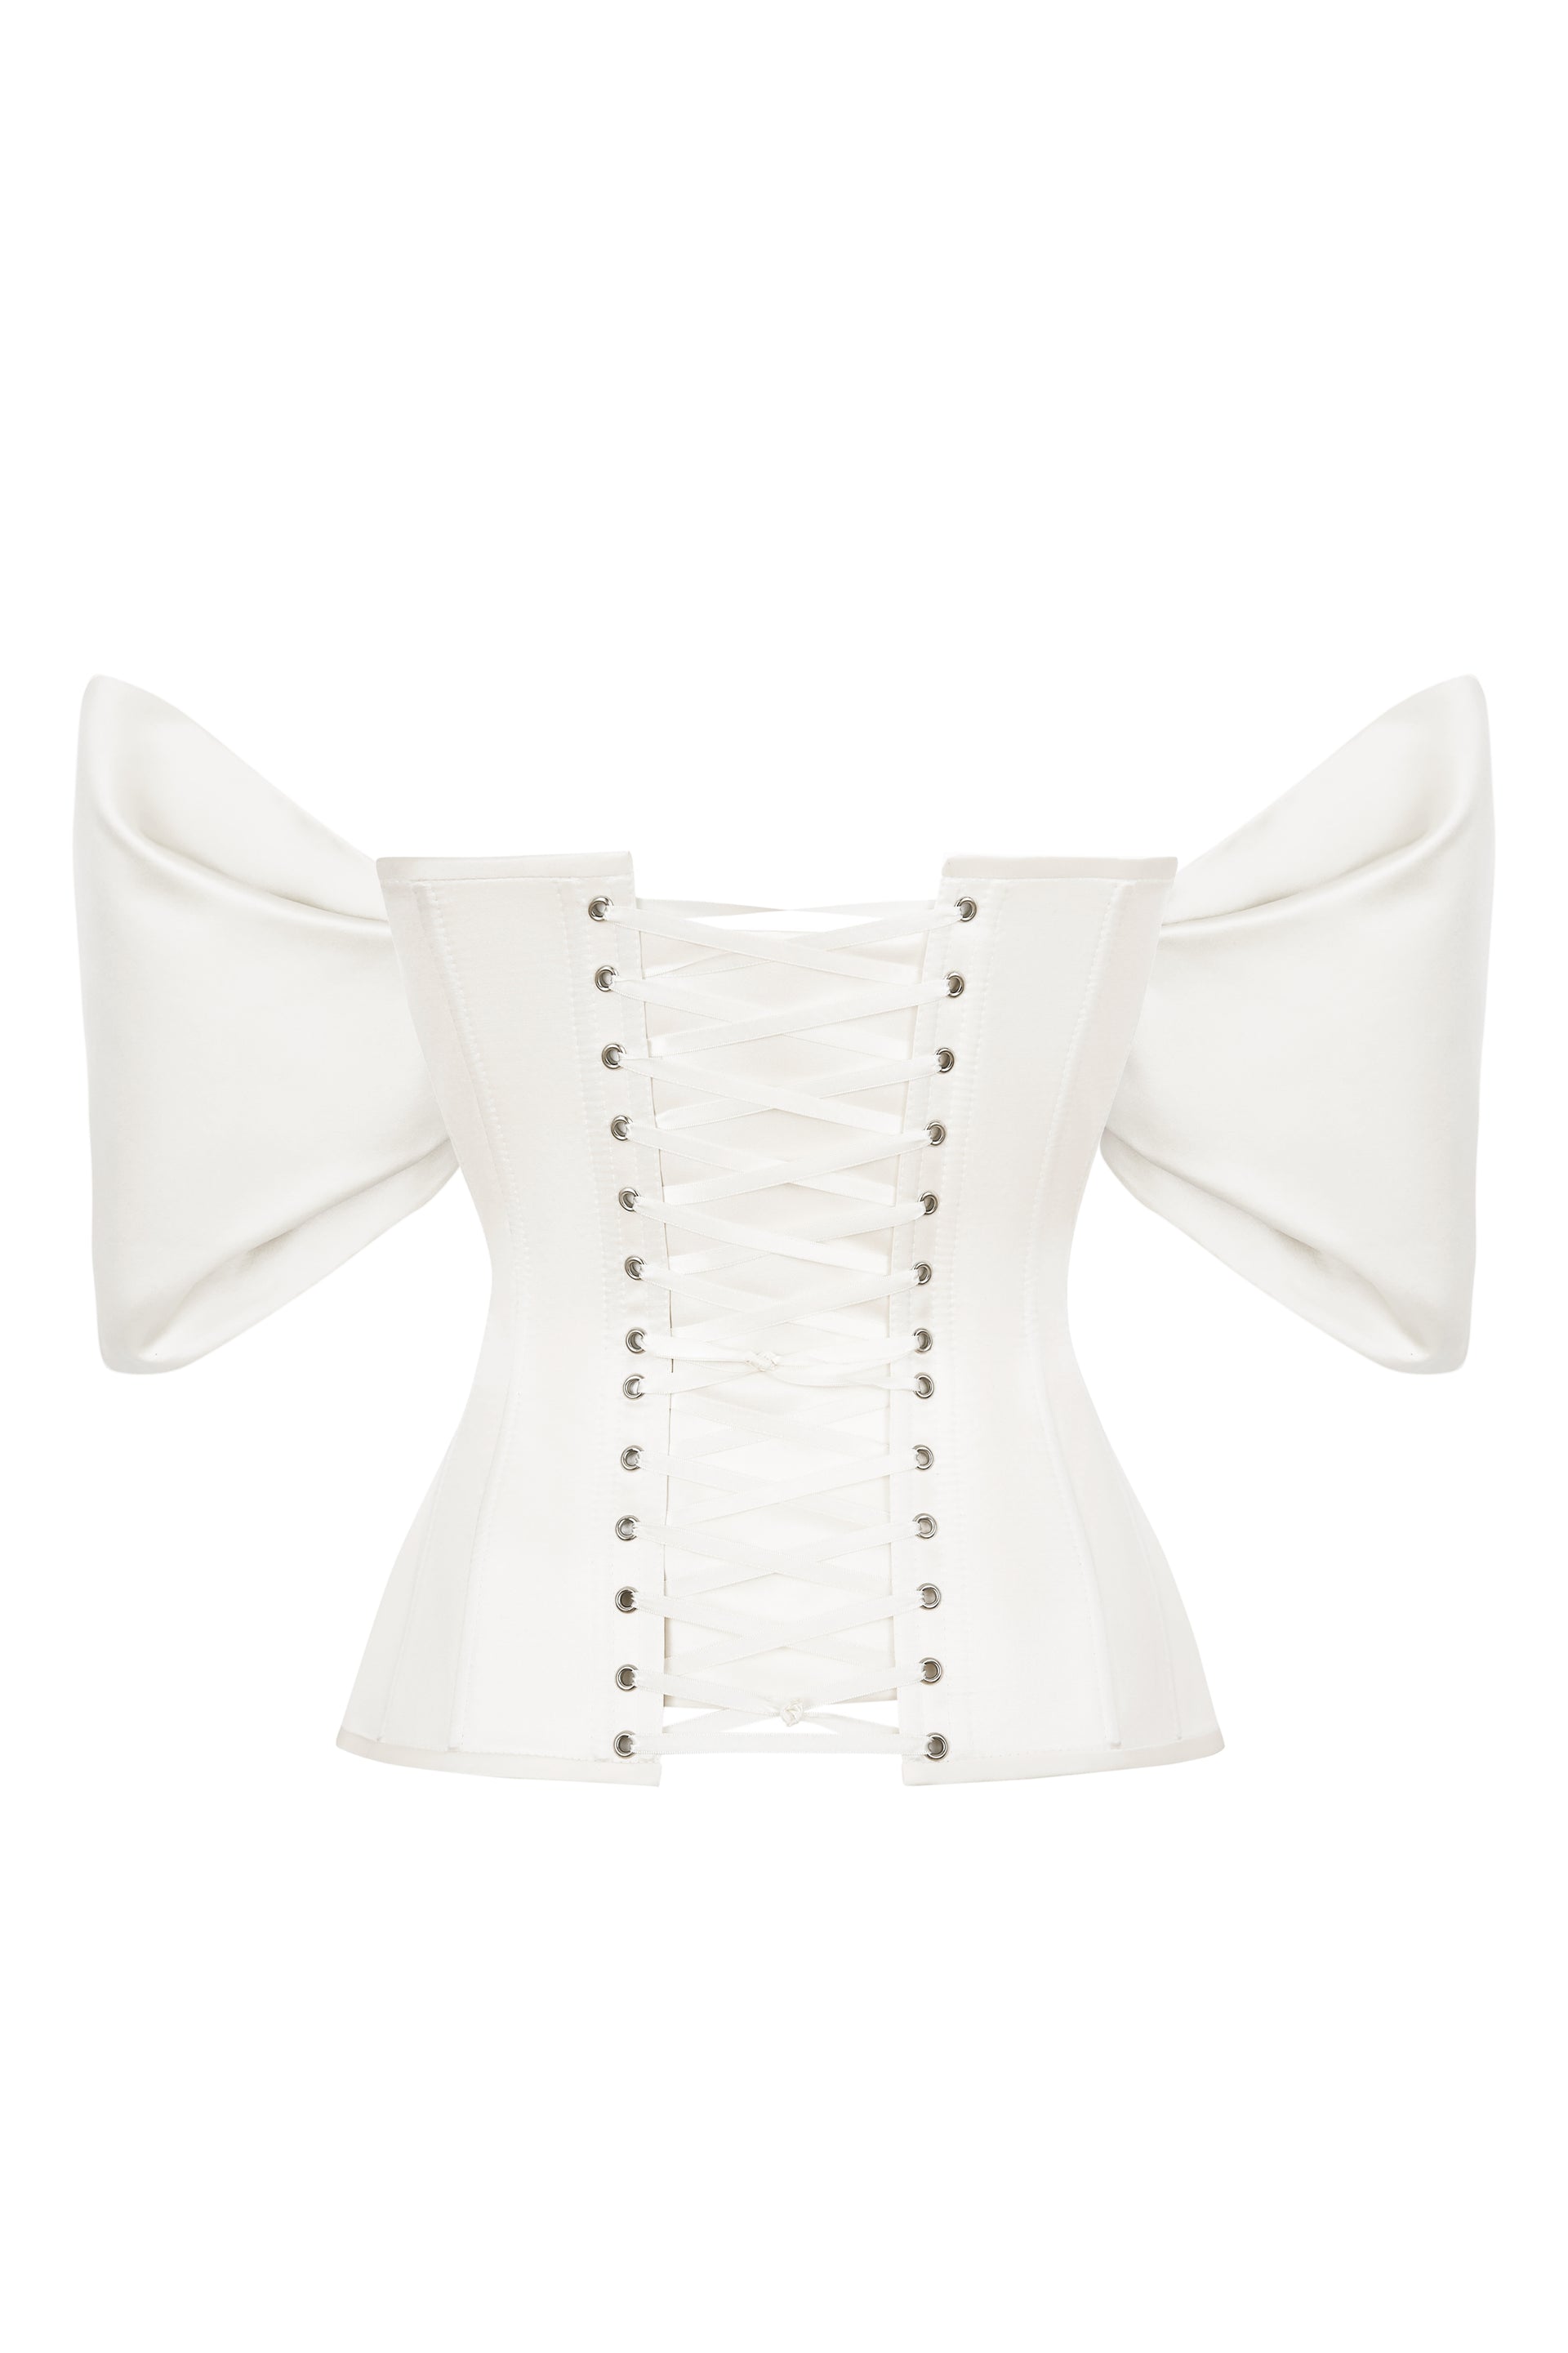 Ivory satin corset with detachable sleeves - STATNAIA